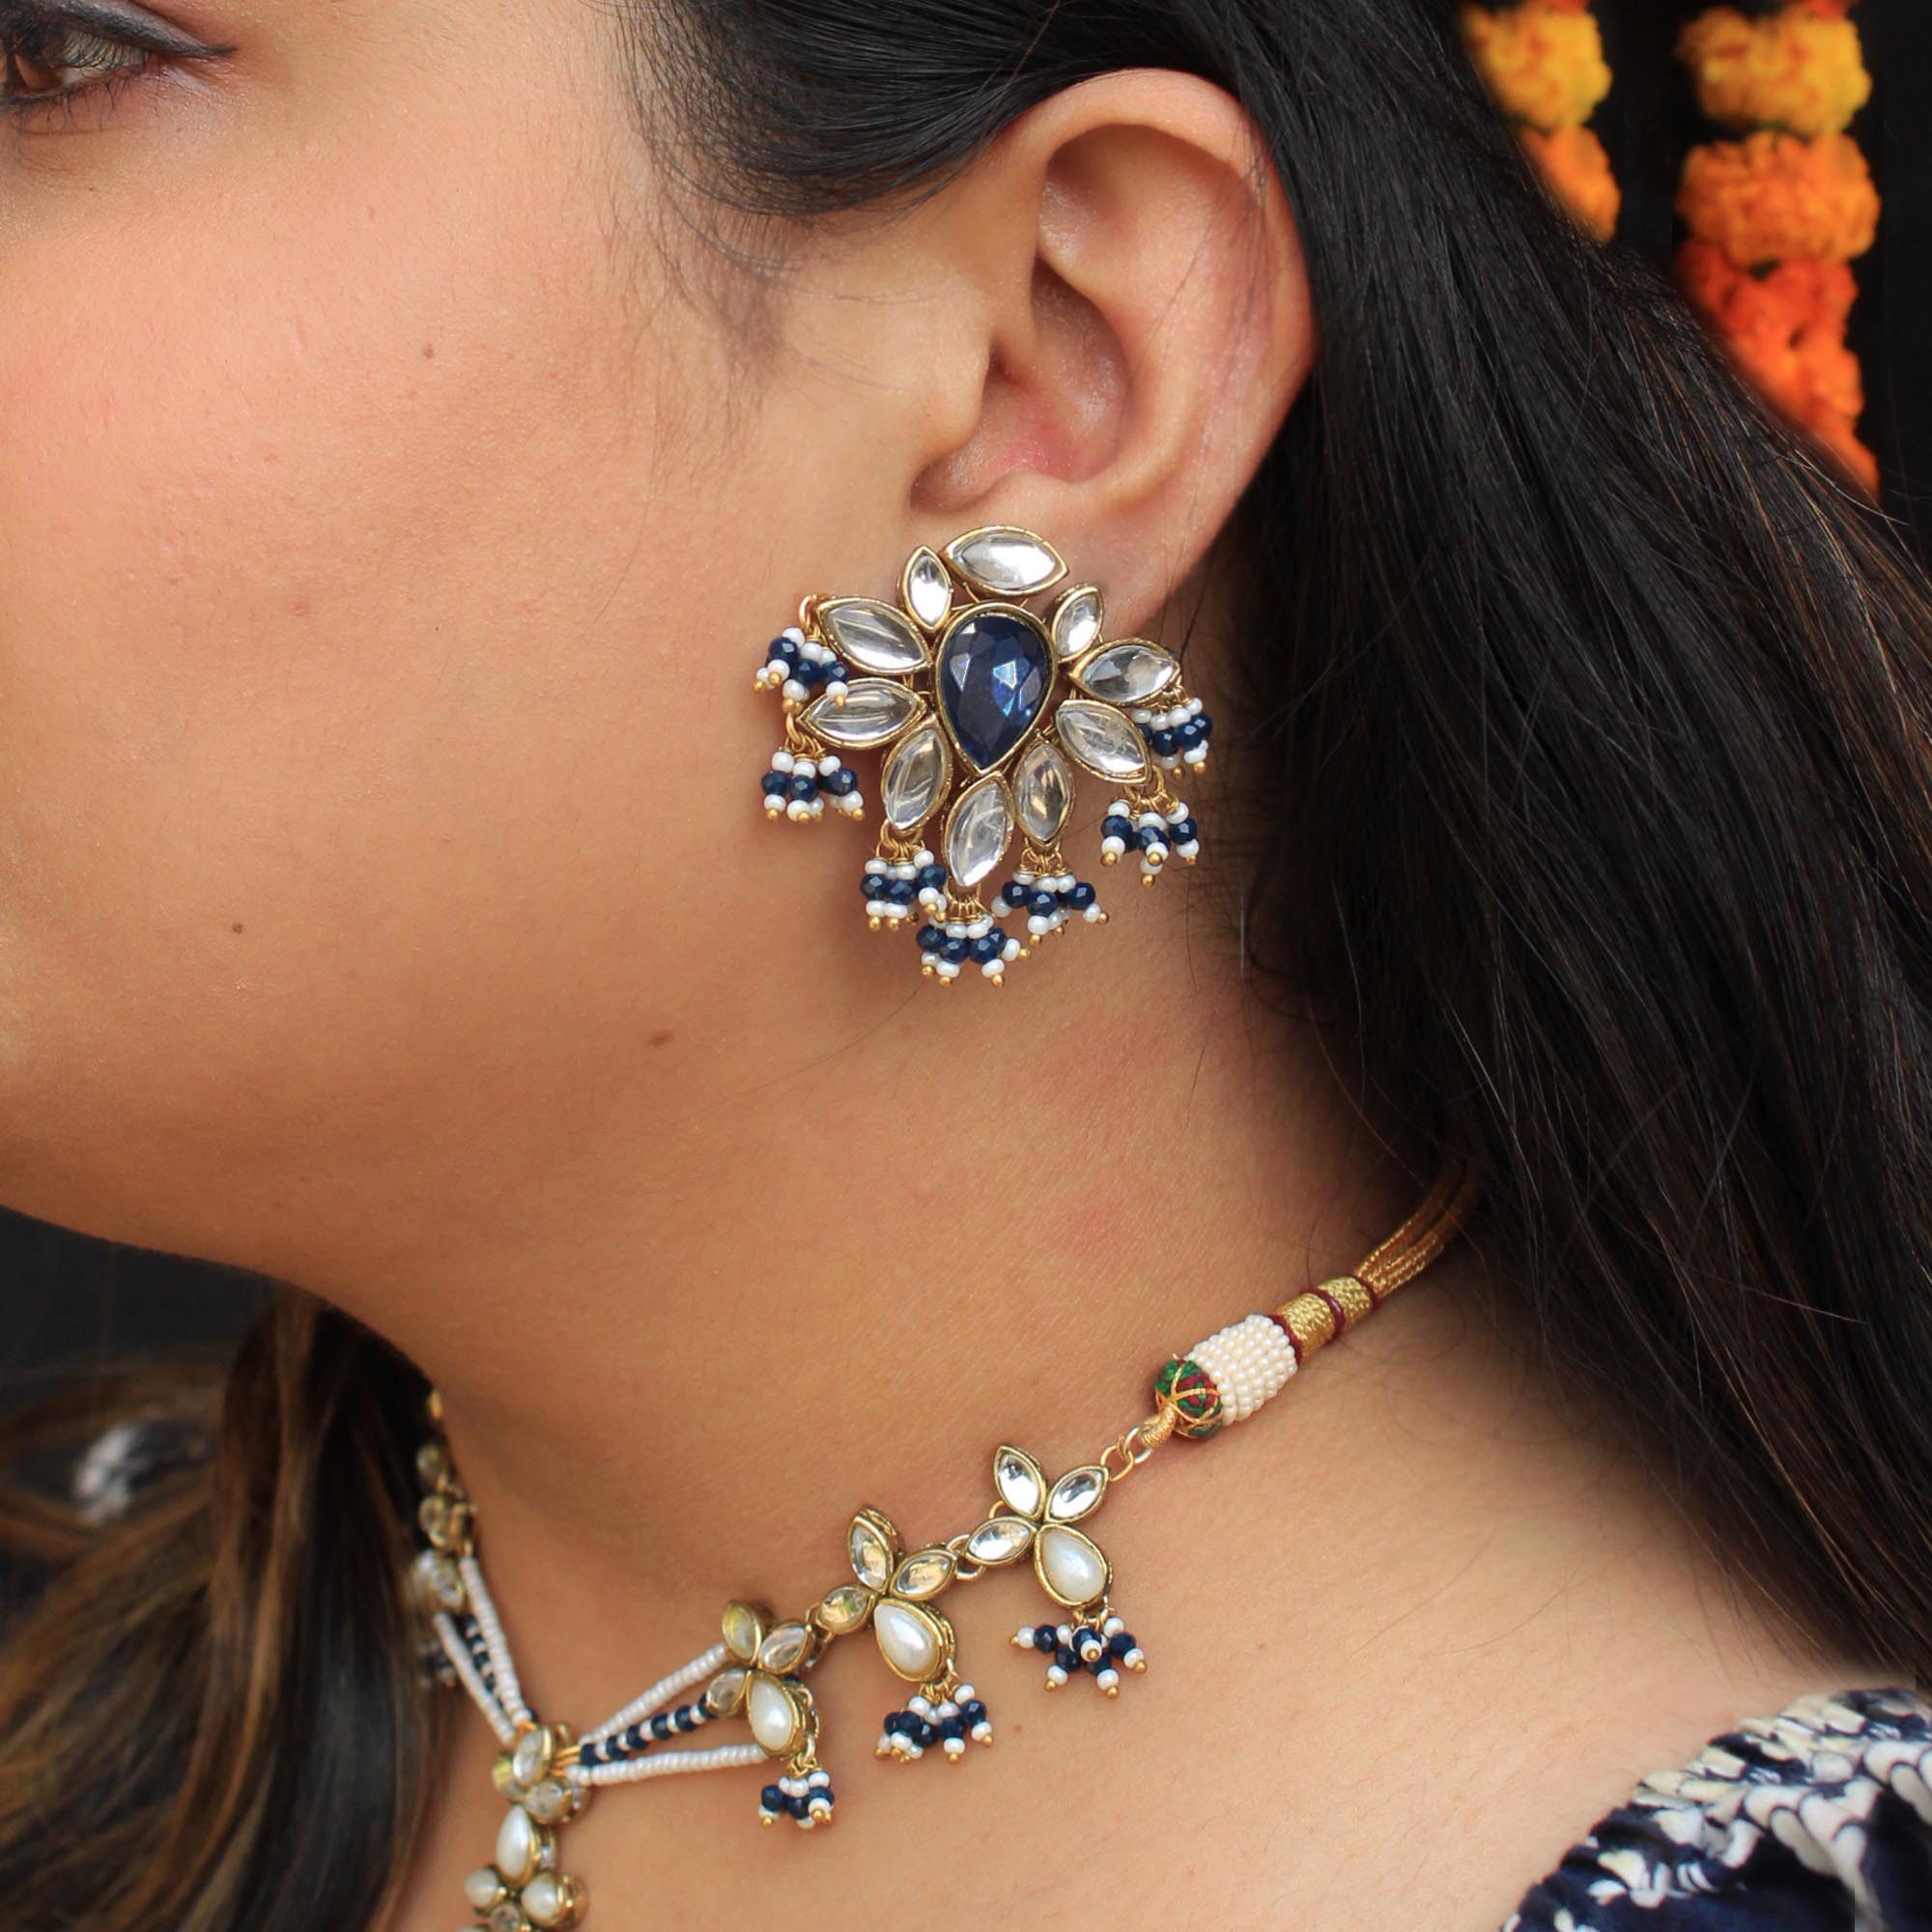 Beabhika Handmade Artificial Jewelry Blue Kundan Earrings Blue Color Beads Heavy Kundan Earrings Available On COD In India Traditional Heeramandi Style Jewelry Stylish Ethnic Dress Matching Earrings Handmade Fashion Statement Earrigns Matching With Suit Saree Frok Skirt Dress Party Wear